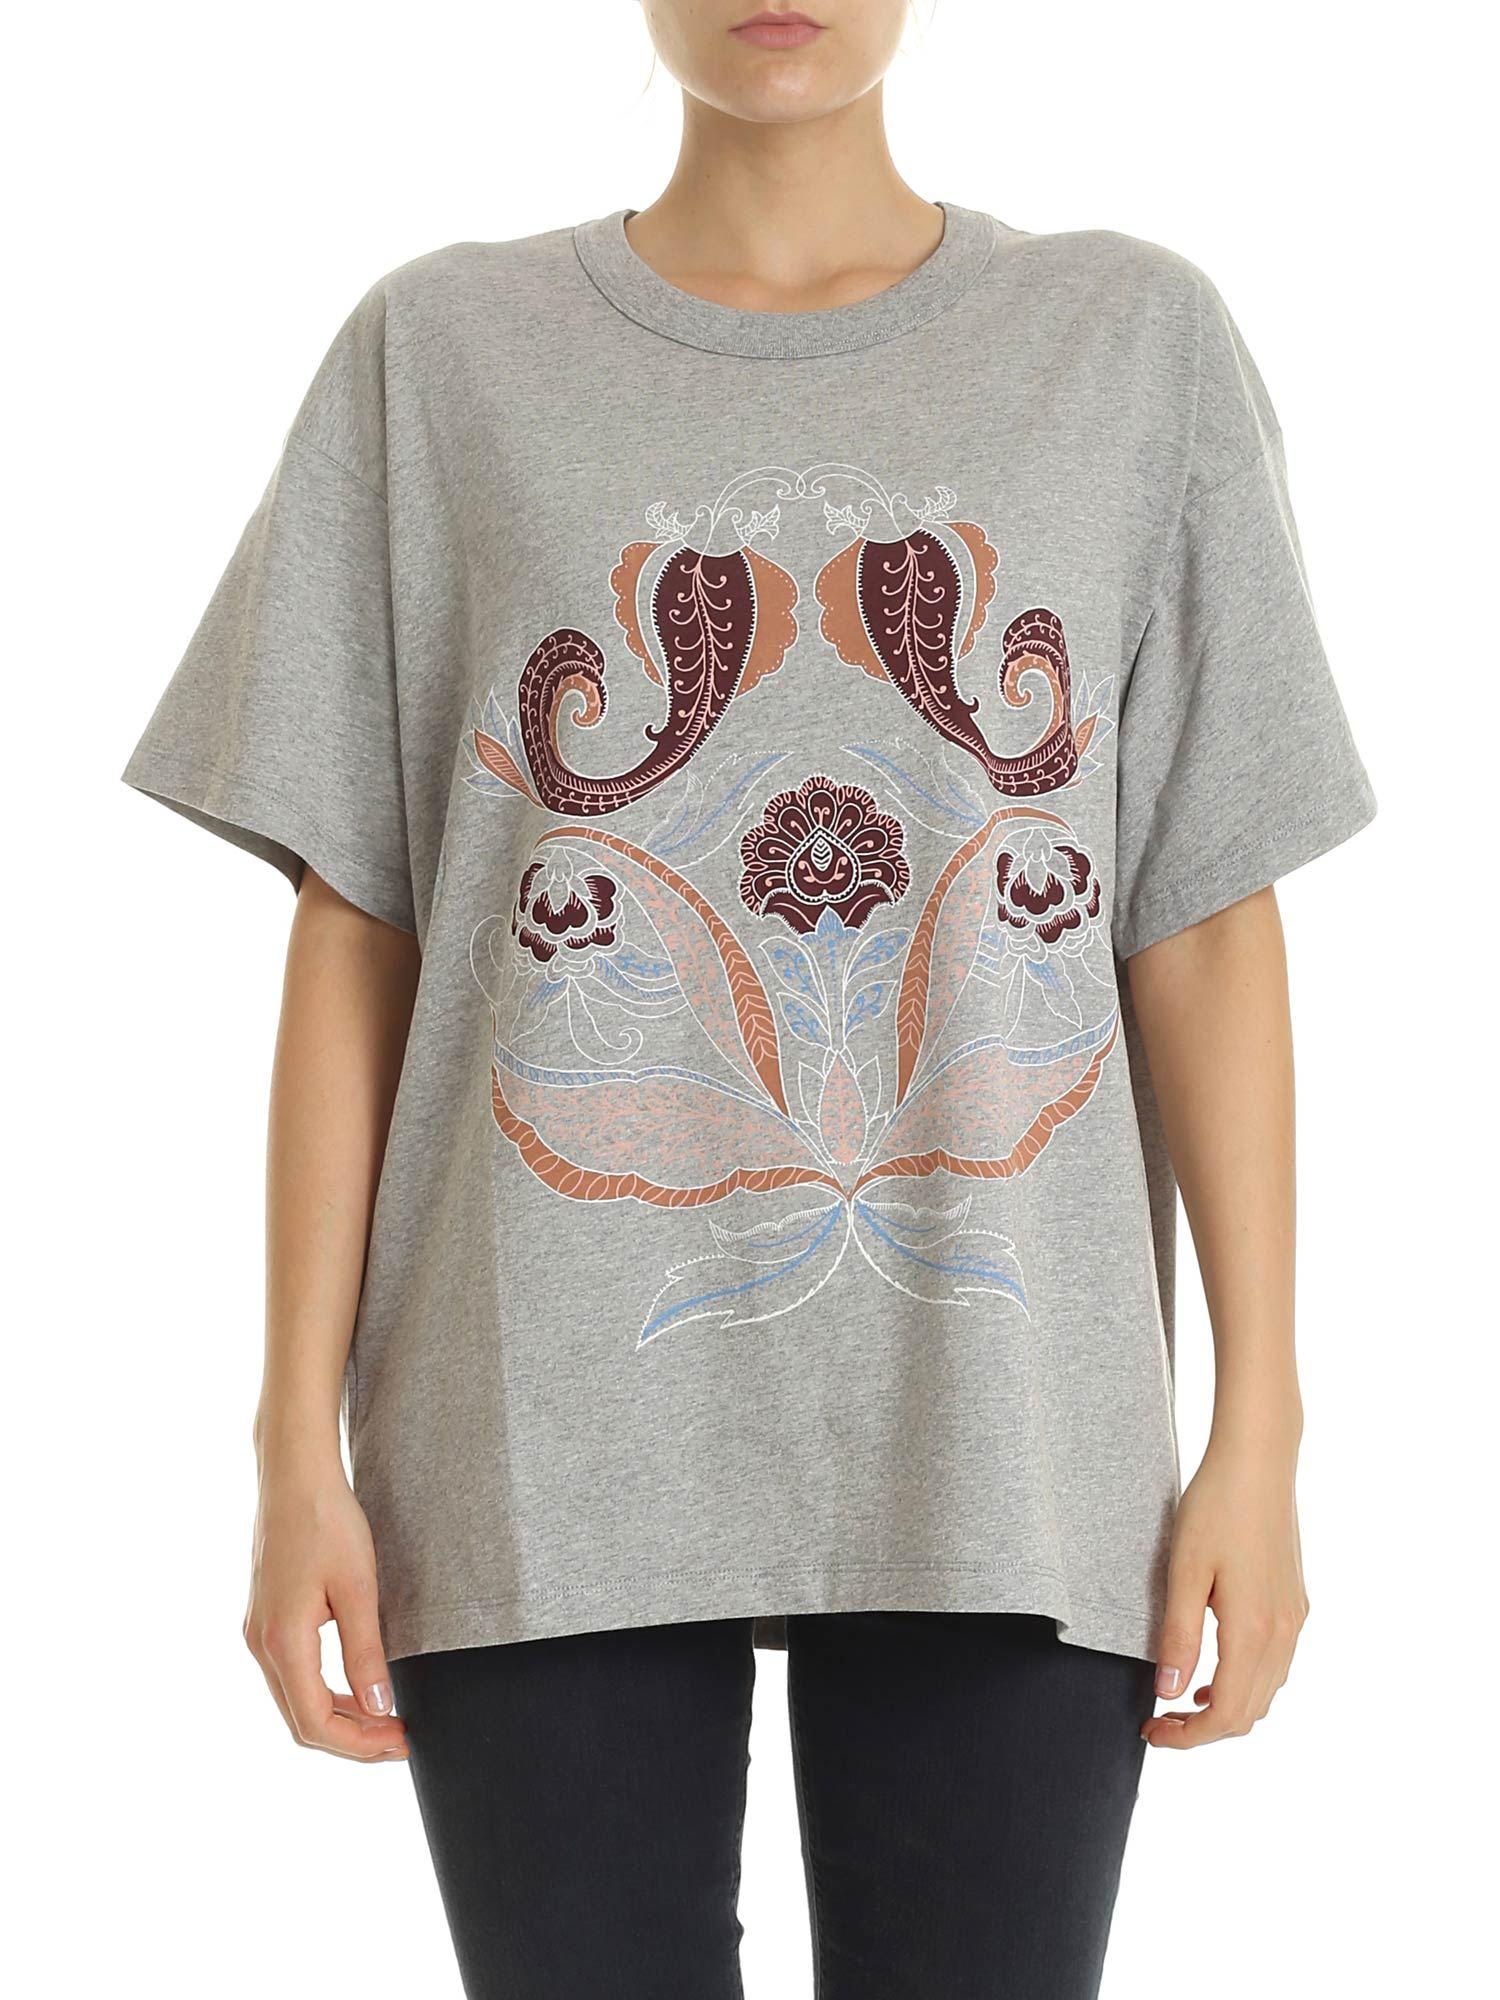 See By Chloé Cotton Printed T-shirt in Grey Melange (Gray) - Save 50% ...